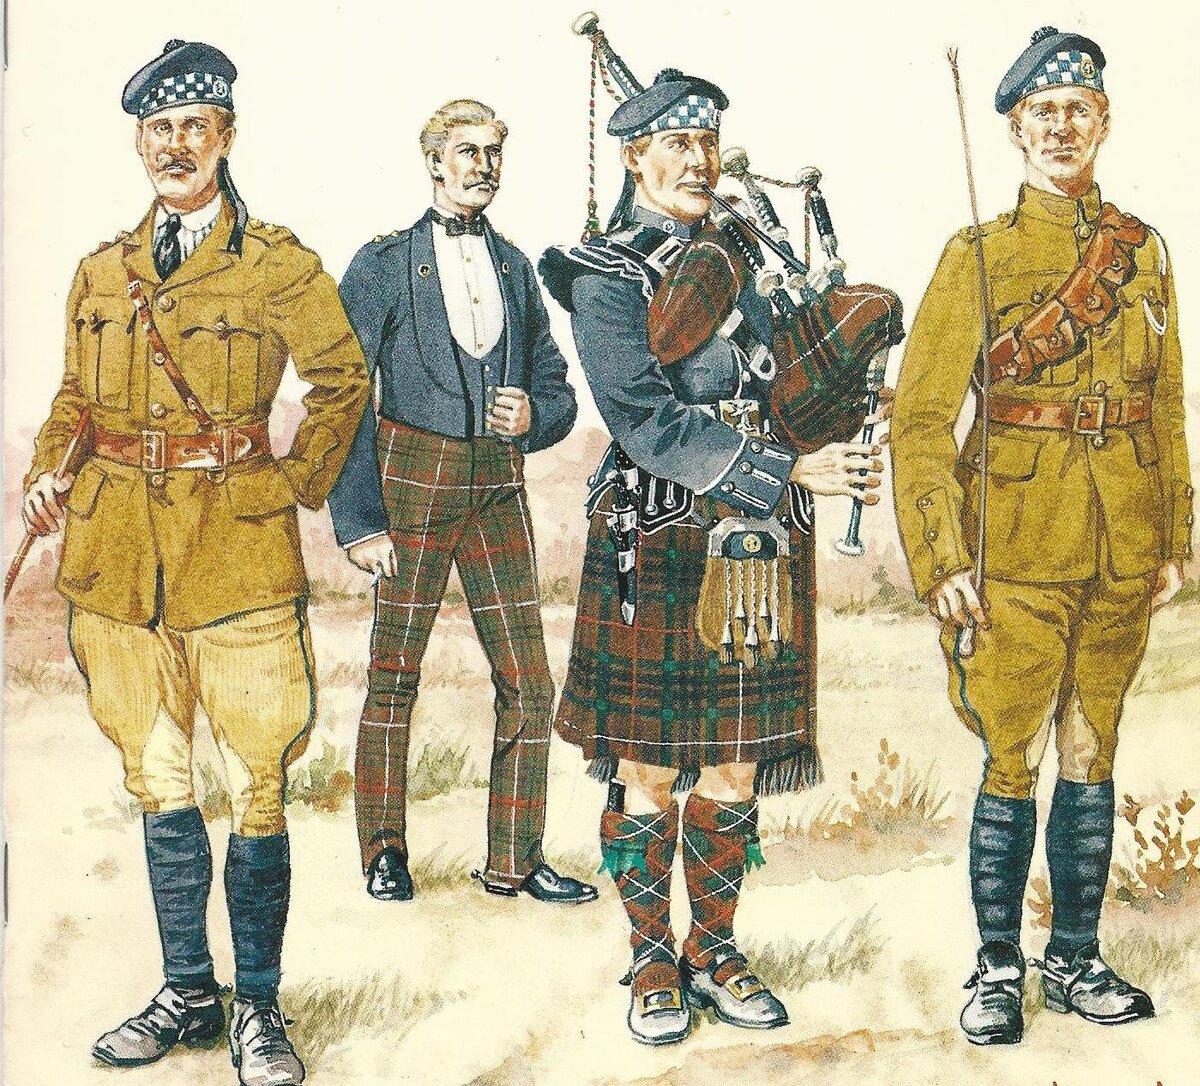 Yeomanry. Lovat Scouts. Uniforms of the British Yeomanry Force, 1794-1914: the Yeomanry Cavalry of Norfolk v. 12. Northamptonshire Yeomanry uniform.